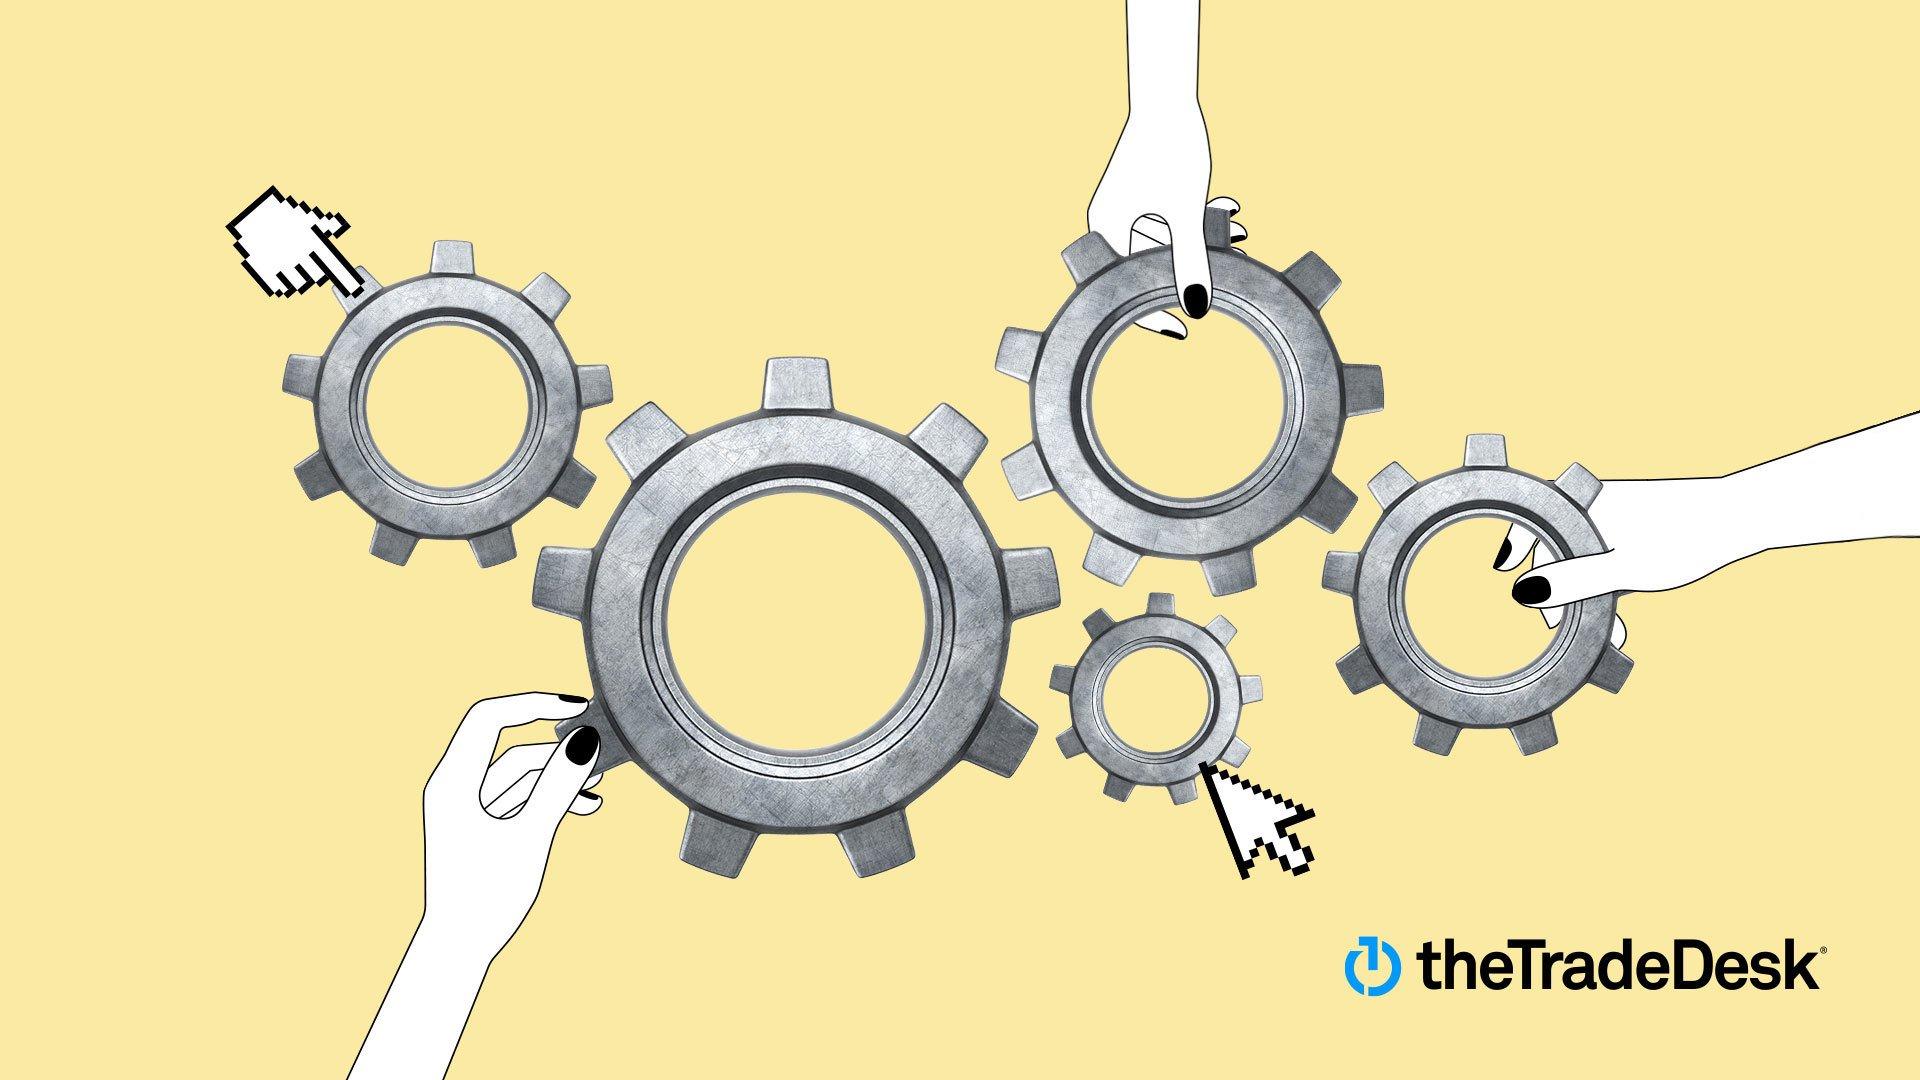 Illustration shows several gears being held by hands or tapped by cursors